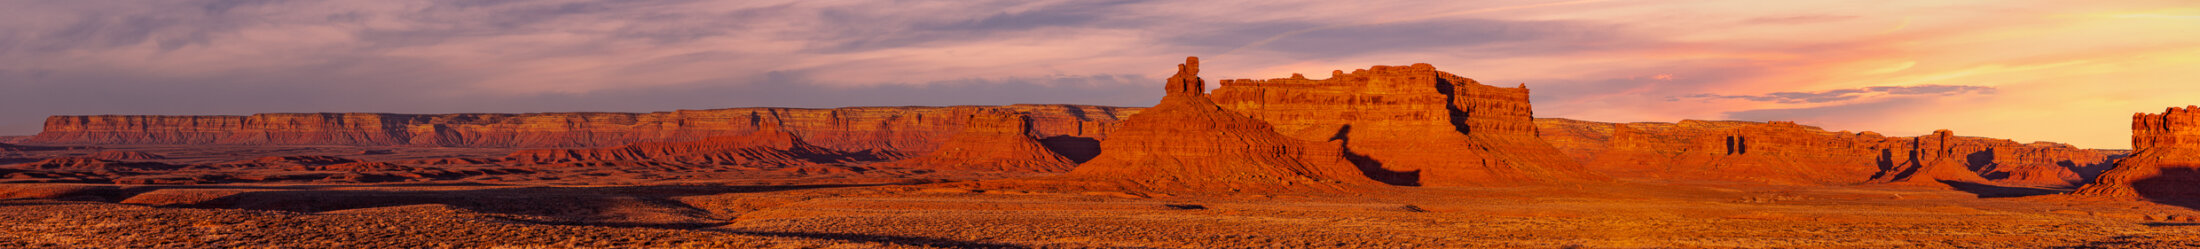 Valley of the Gods Northward Pano